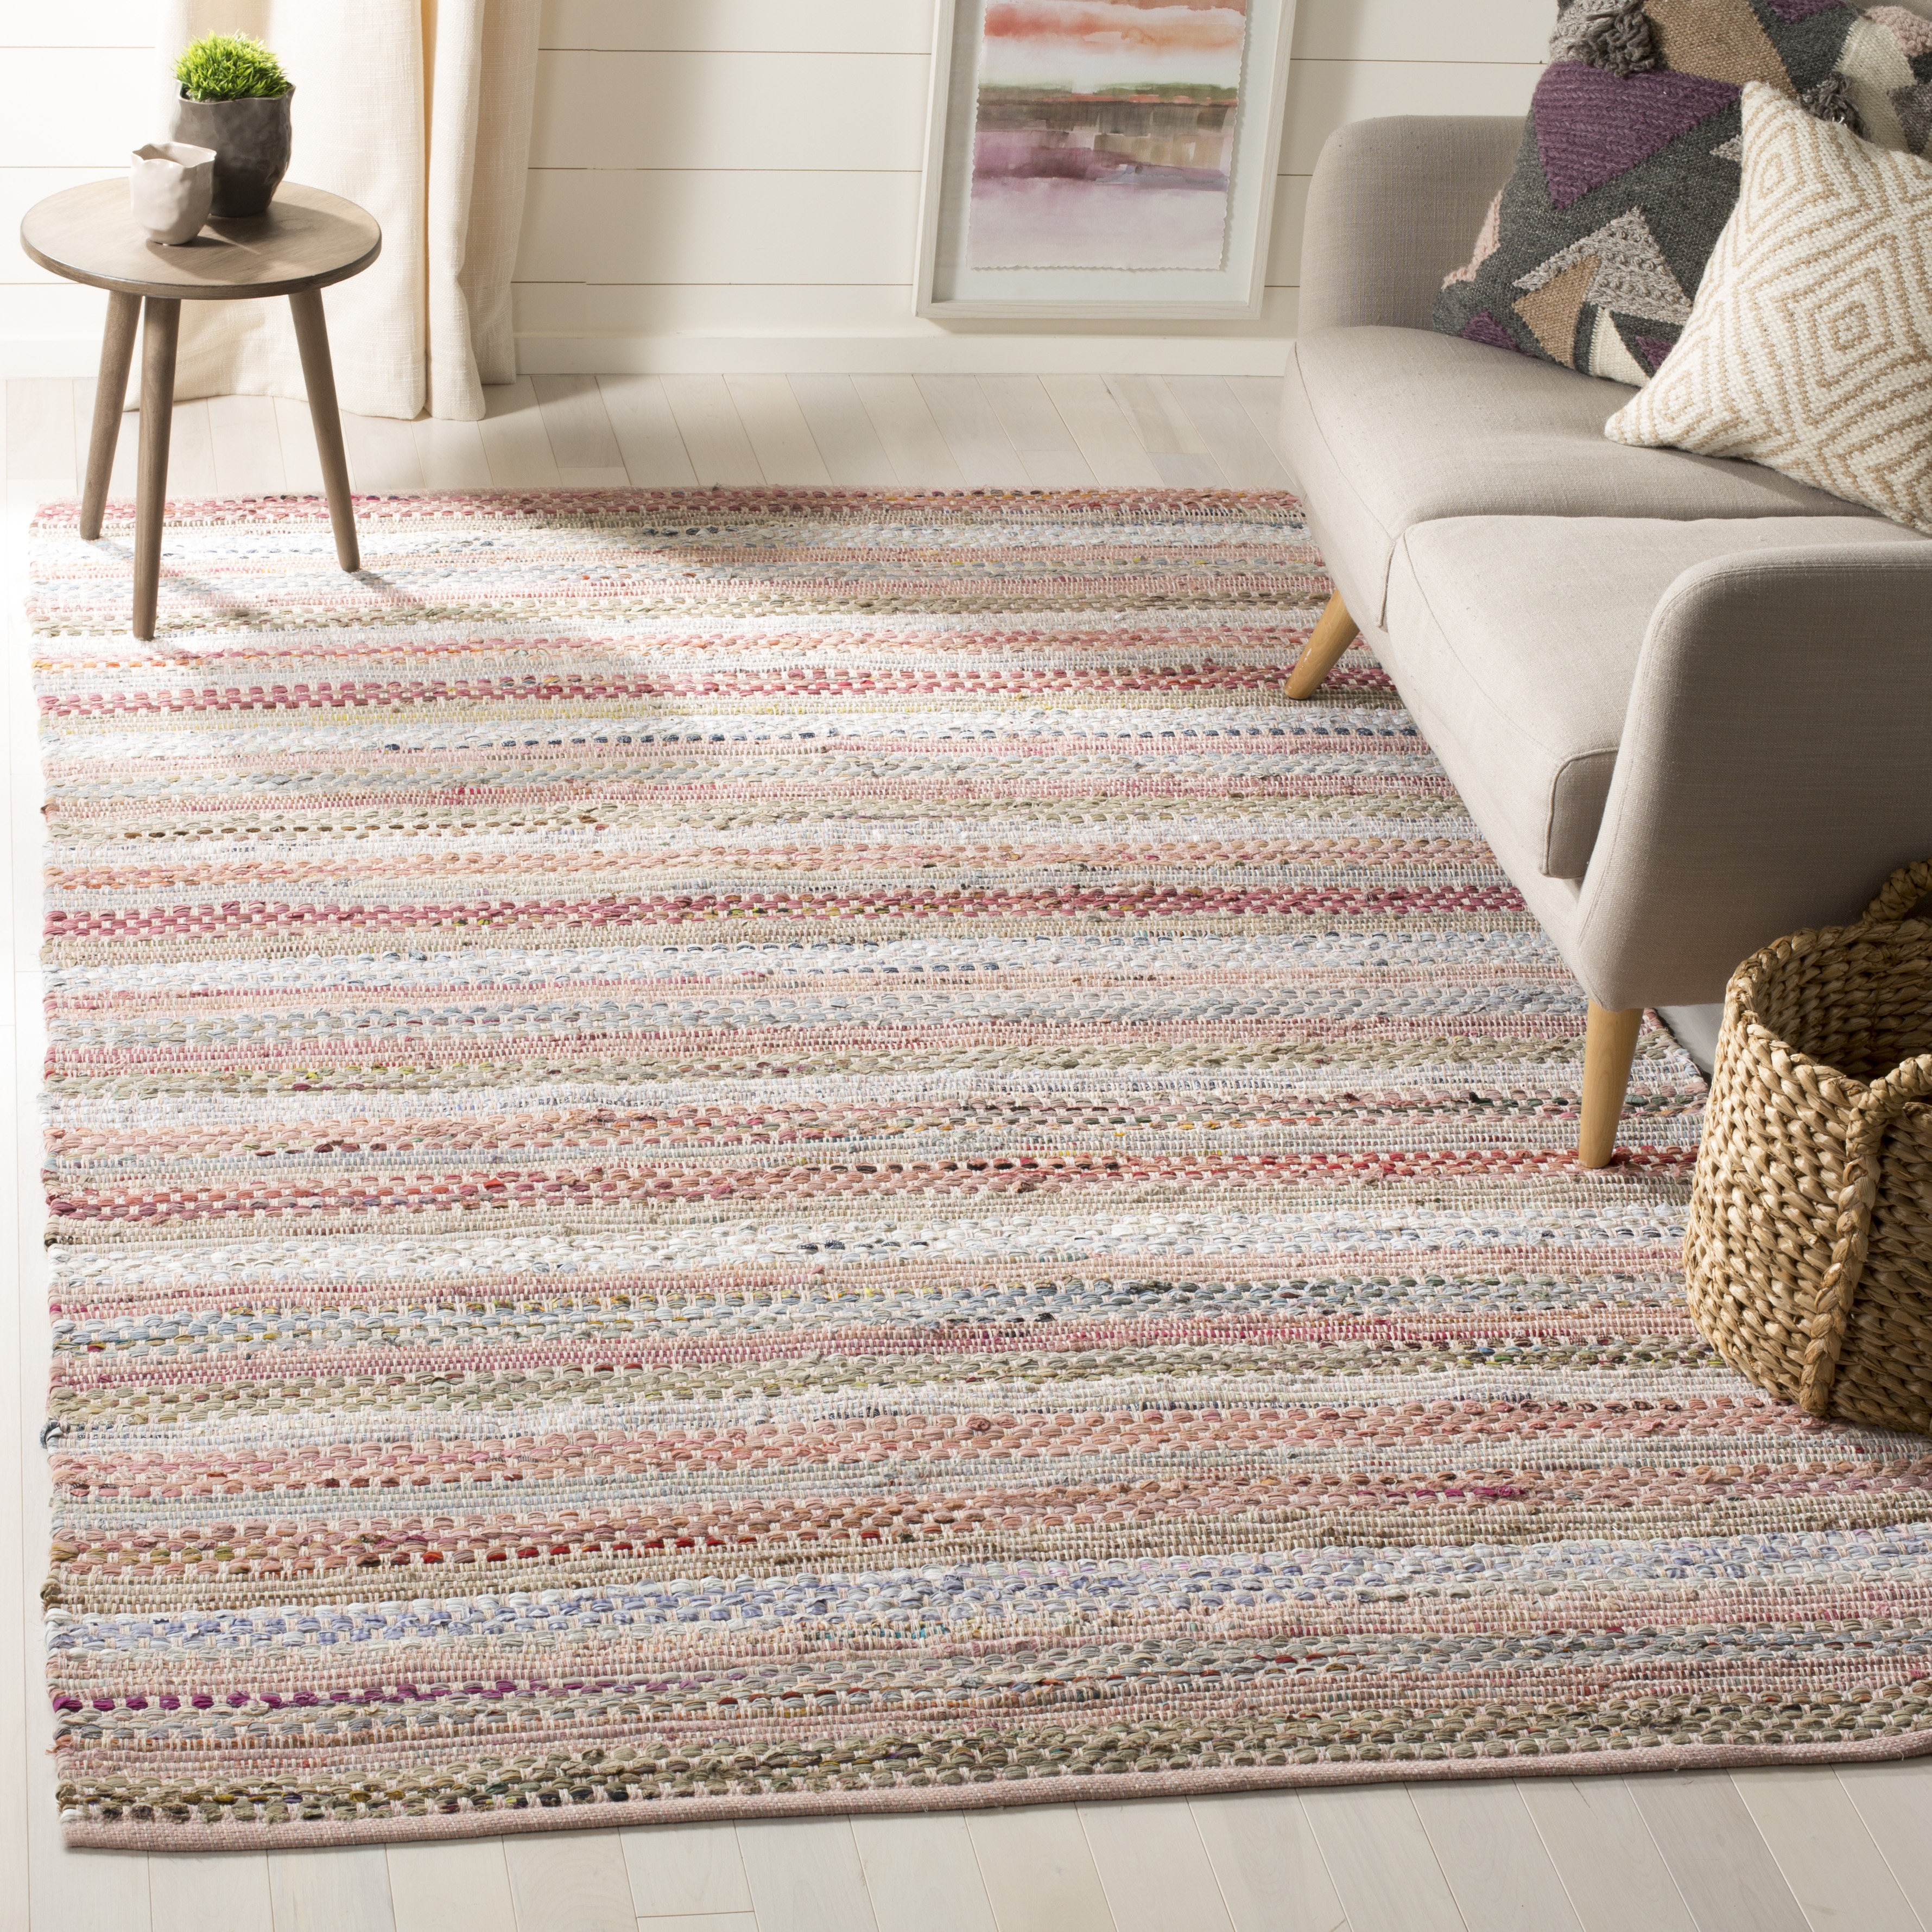 Arlo Home Hand Woven Area Rug, MTK975D, Pink/Multi,  5' X 8' - Image 1